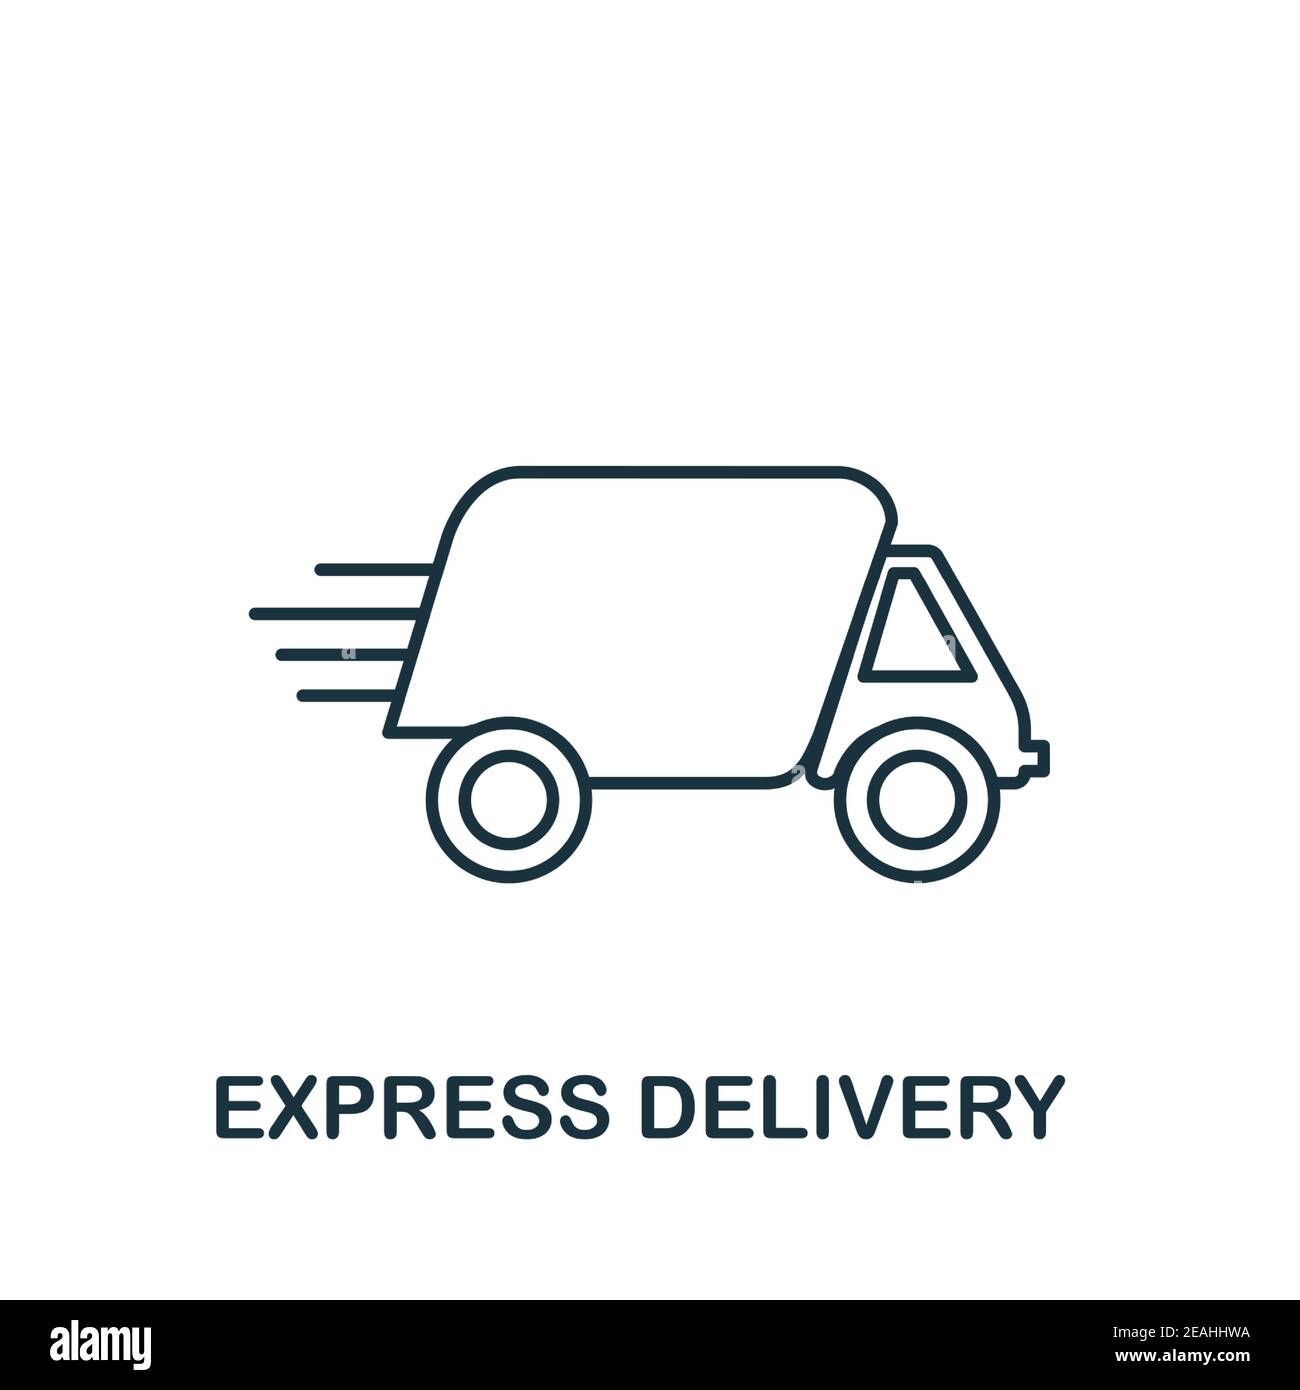 https://c8.alamy.com/comp/2EAHHWA/express-delivery-icon-simple-element-from-delivery-collection-creative-express-delivery-icon-for-web-design-templates-infographics-and-more-2EAHHWA.jpg